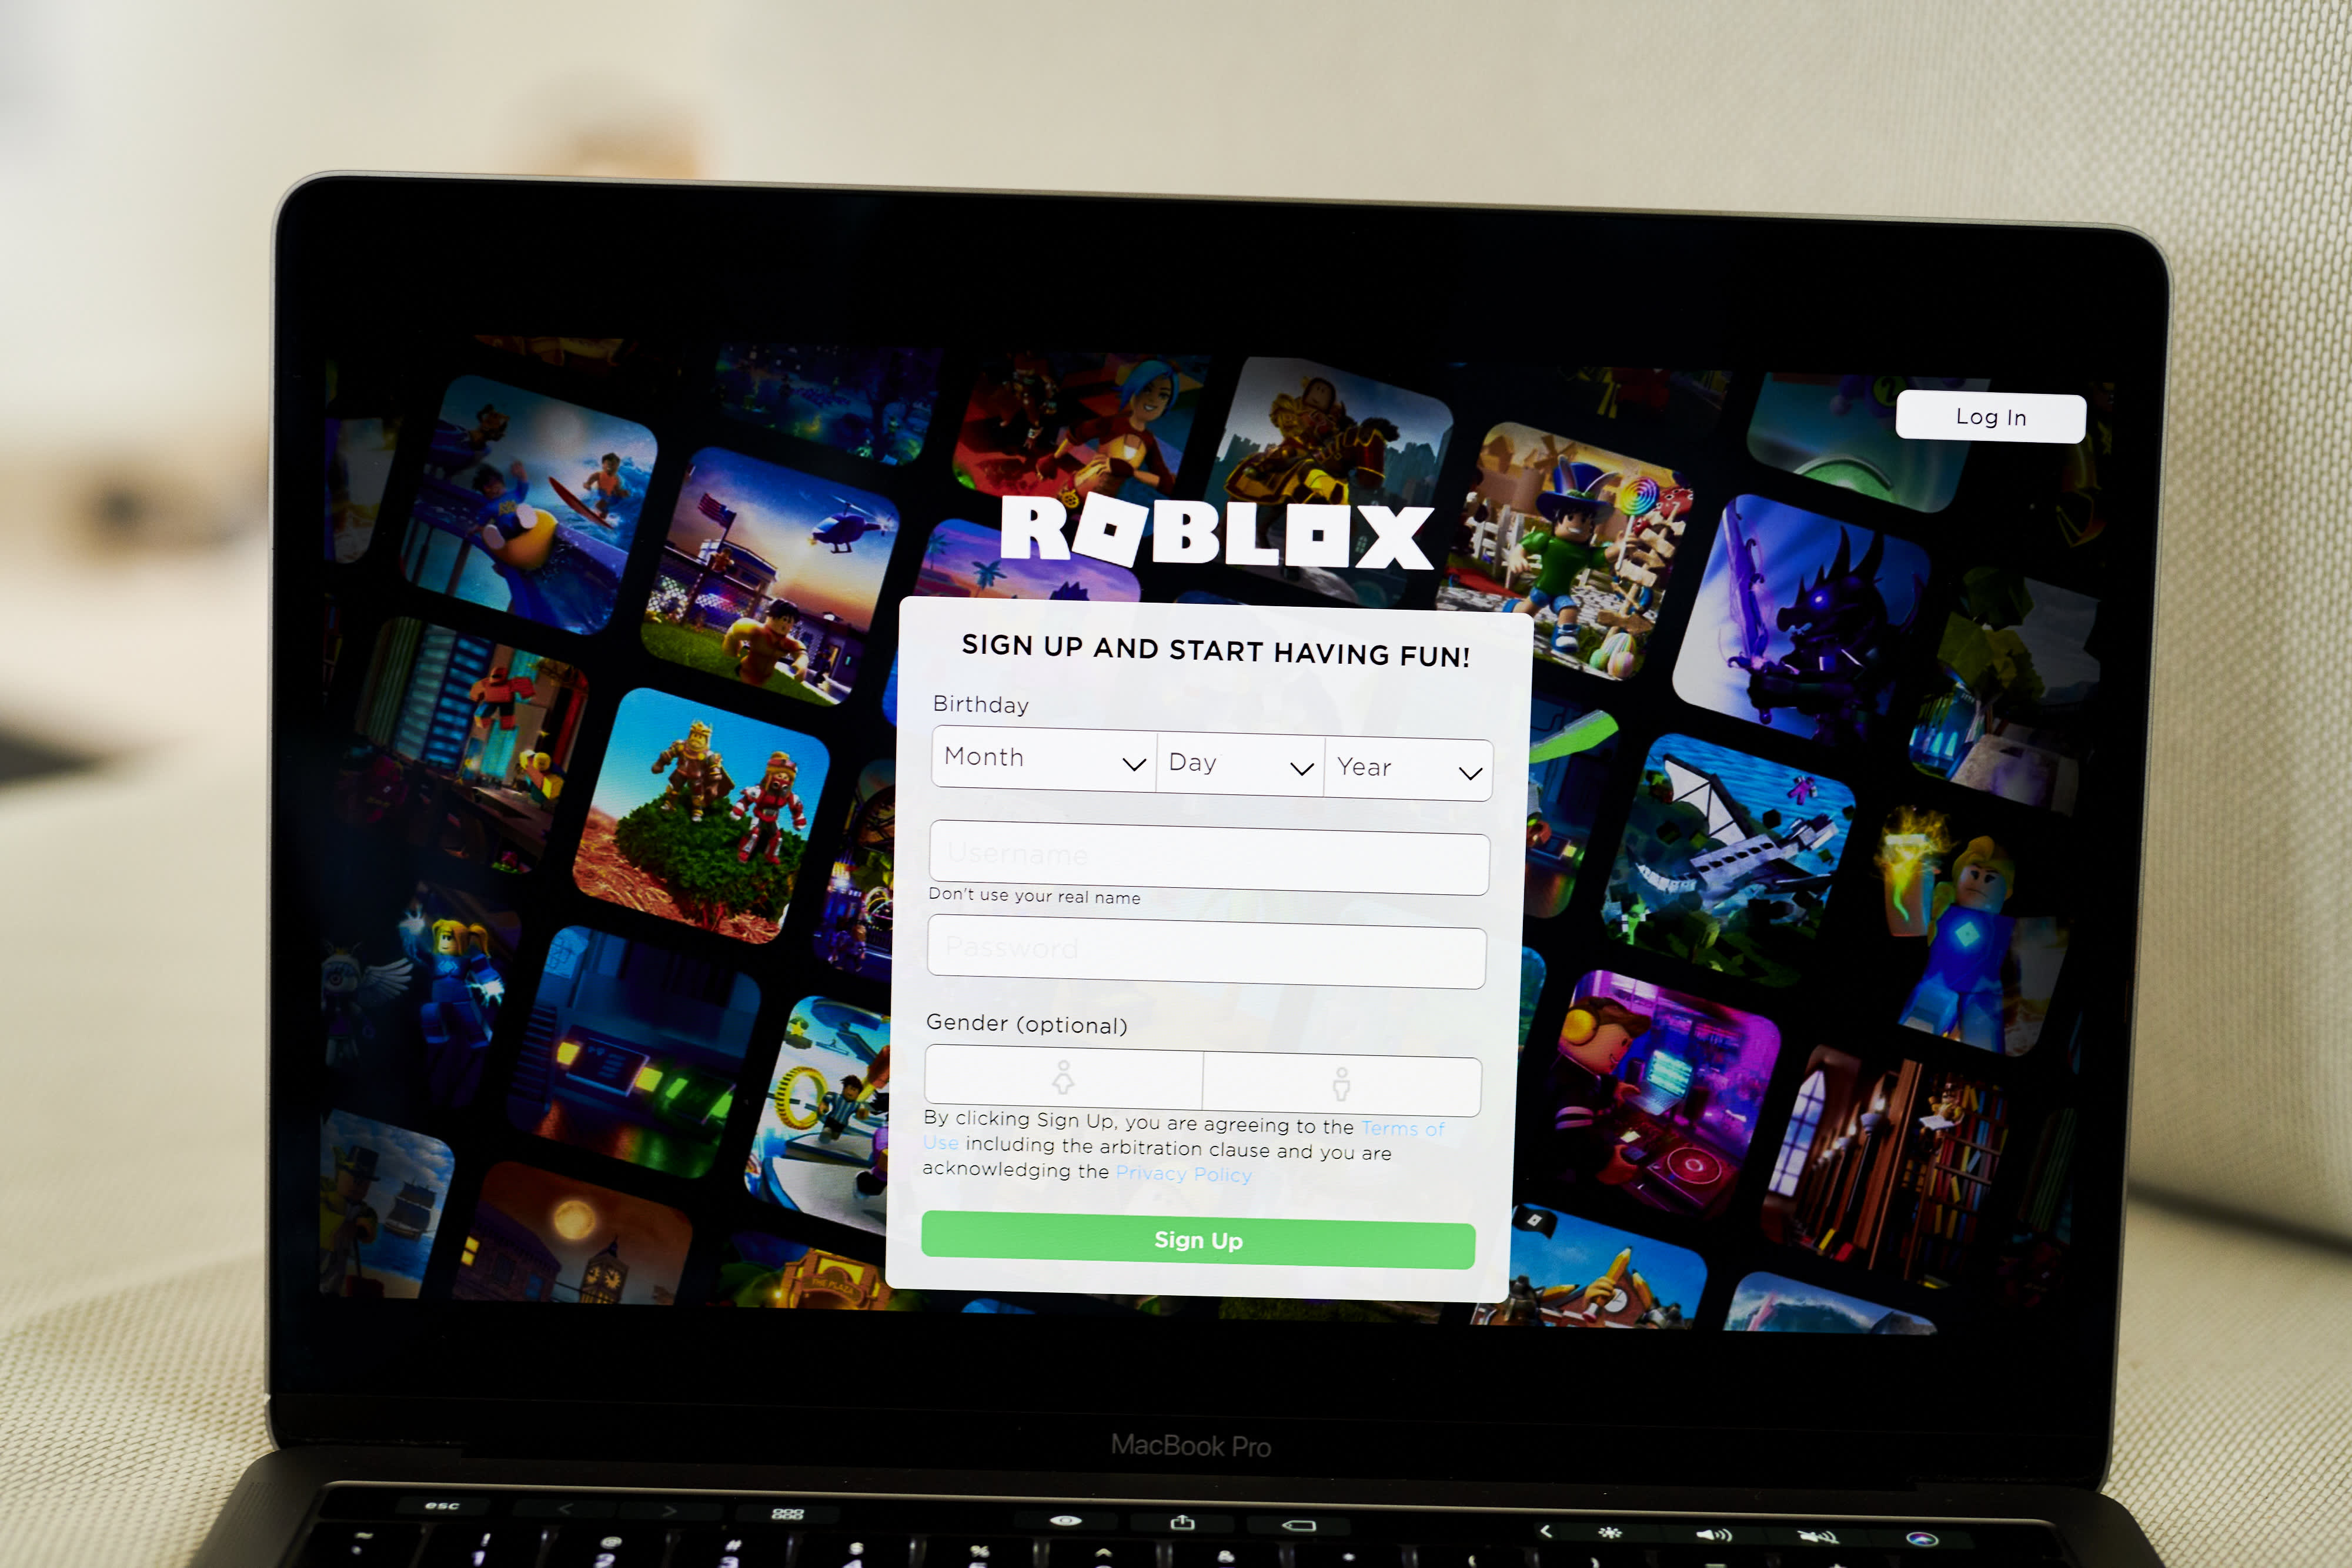 roblox going ipo